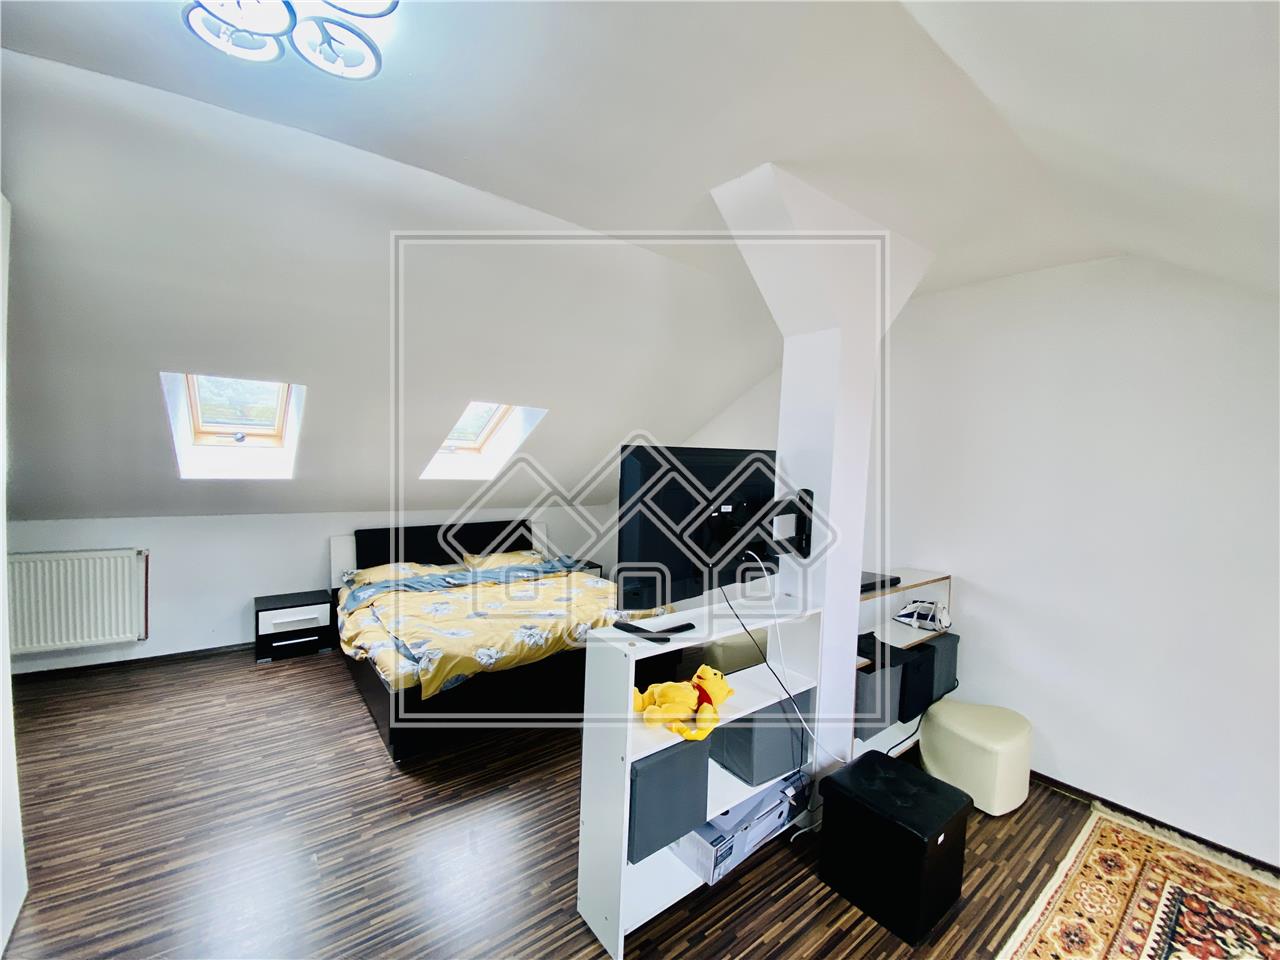 Apartment for sale in Sibiu - 128 square meters - Strand II area